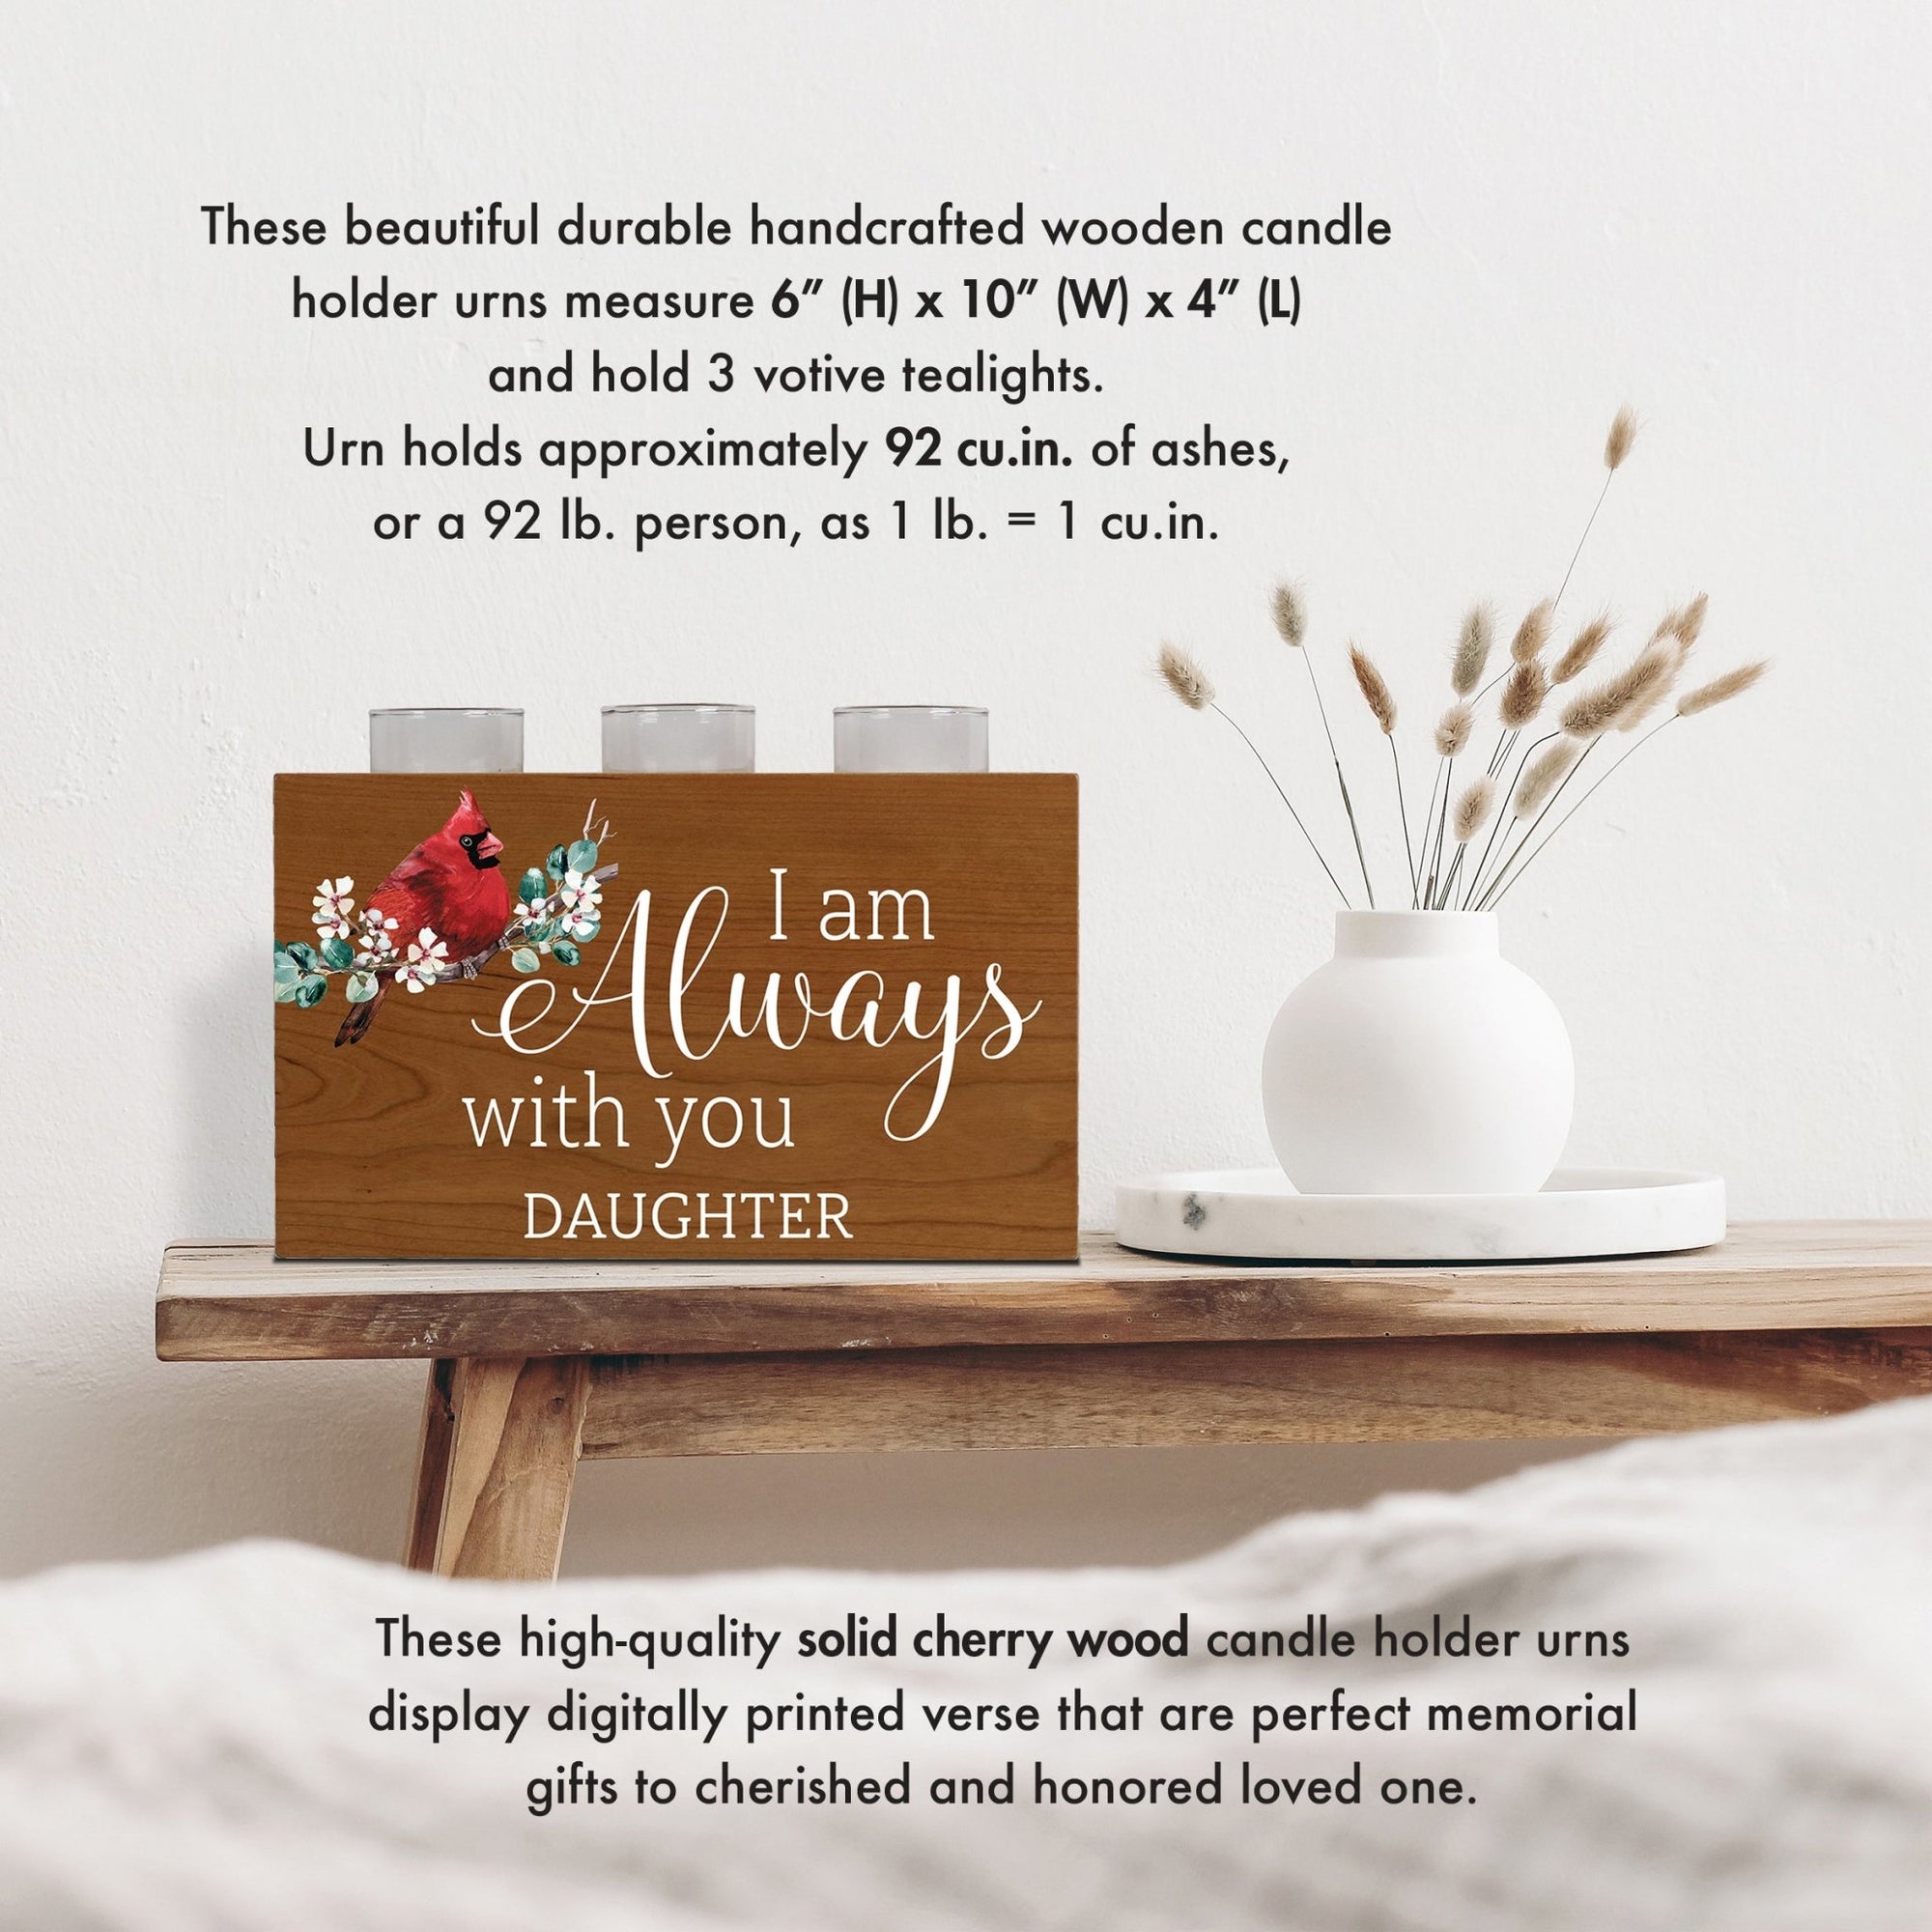 Cardinal Memorial Tealight Candle Holder Cremation Urn For Human Ashes - I Am Always Daughter - LifeSong Milestones